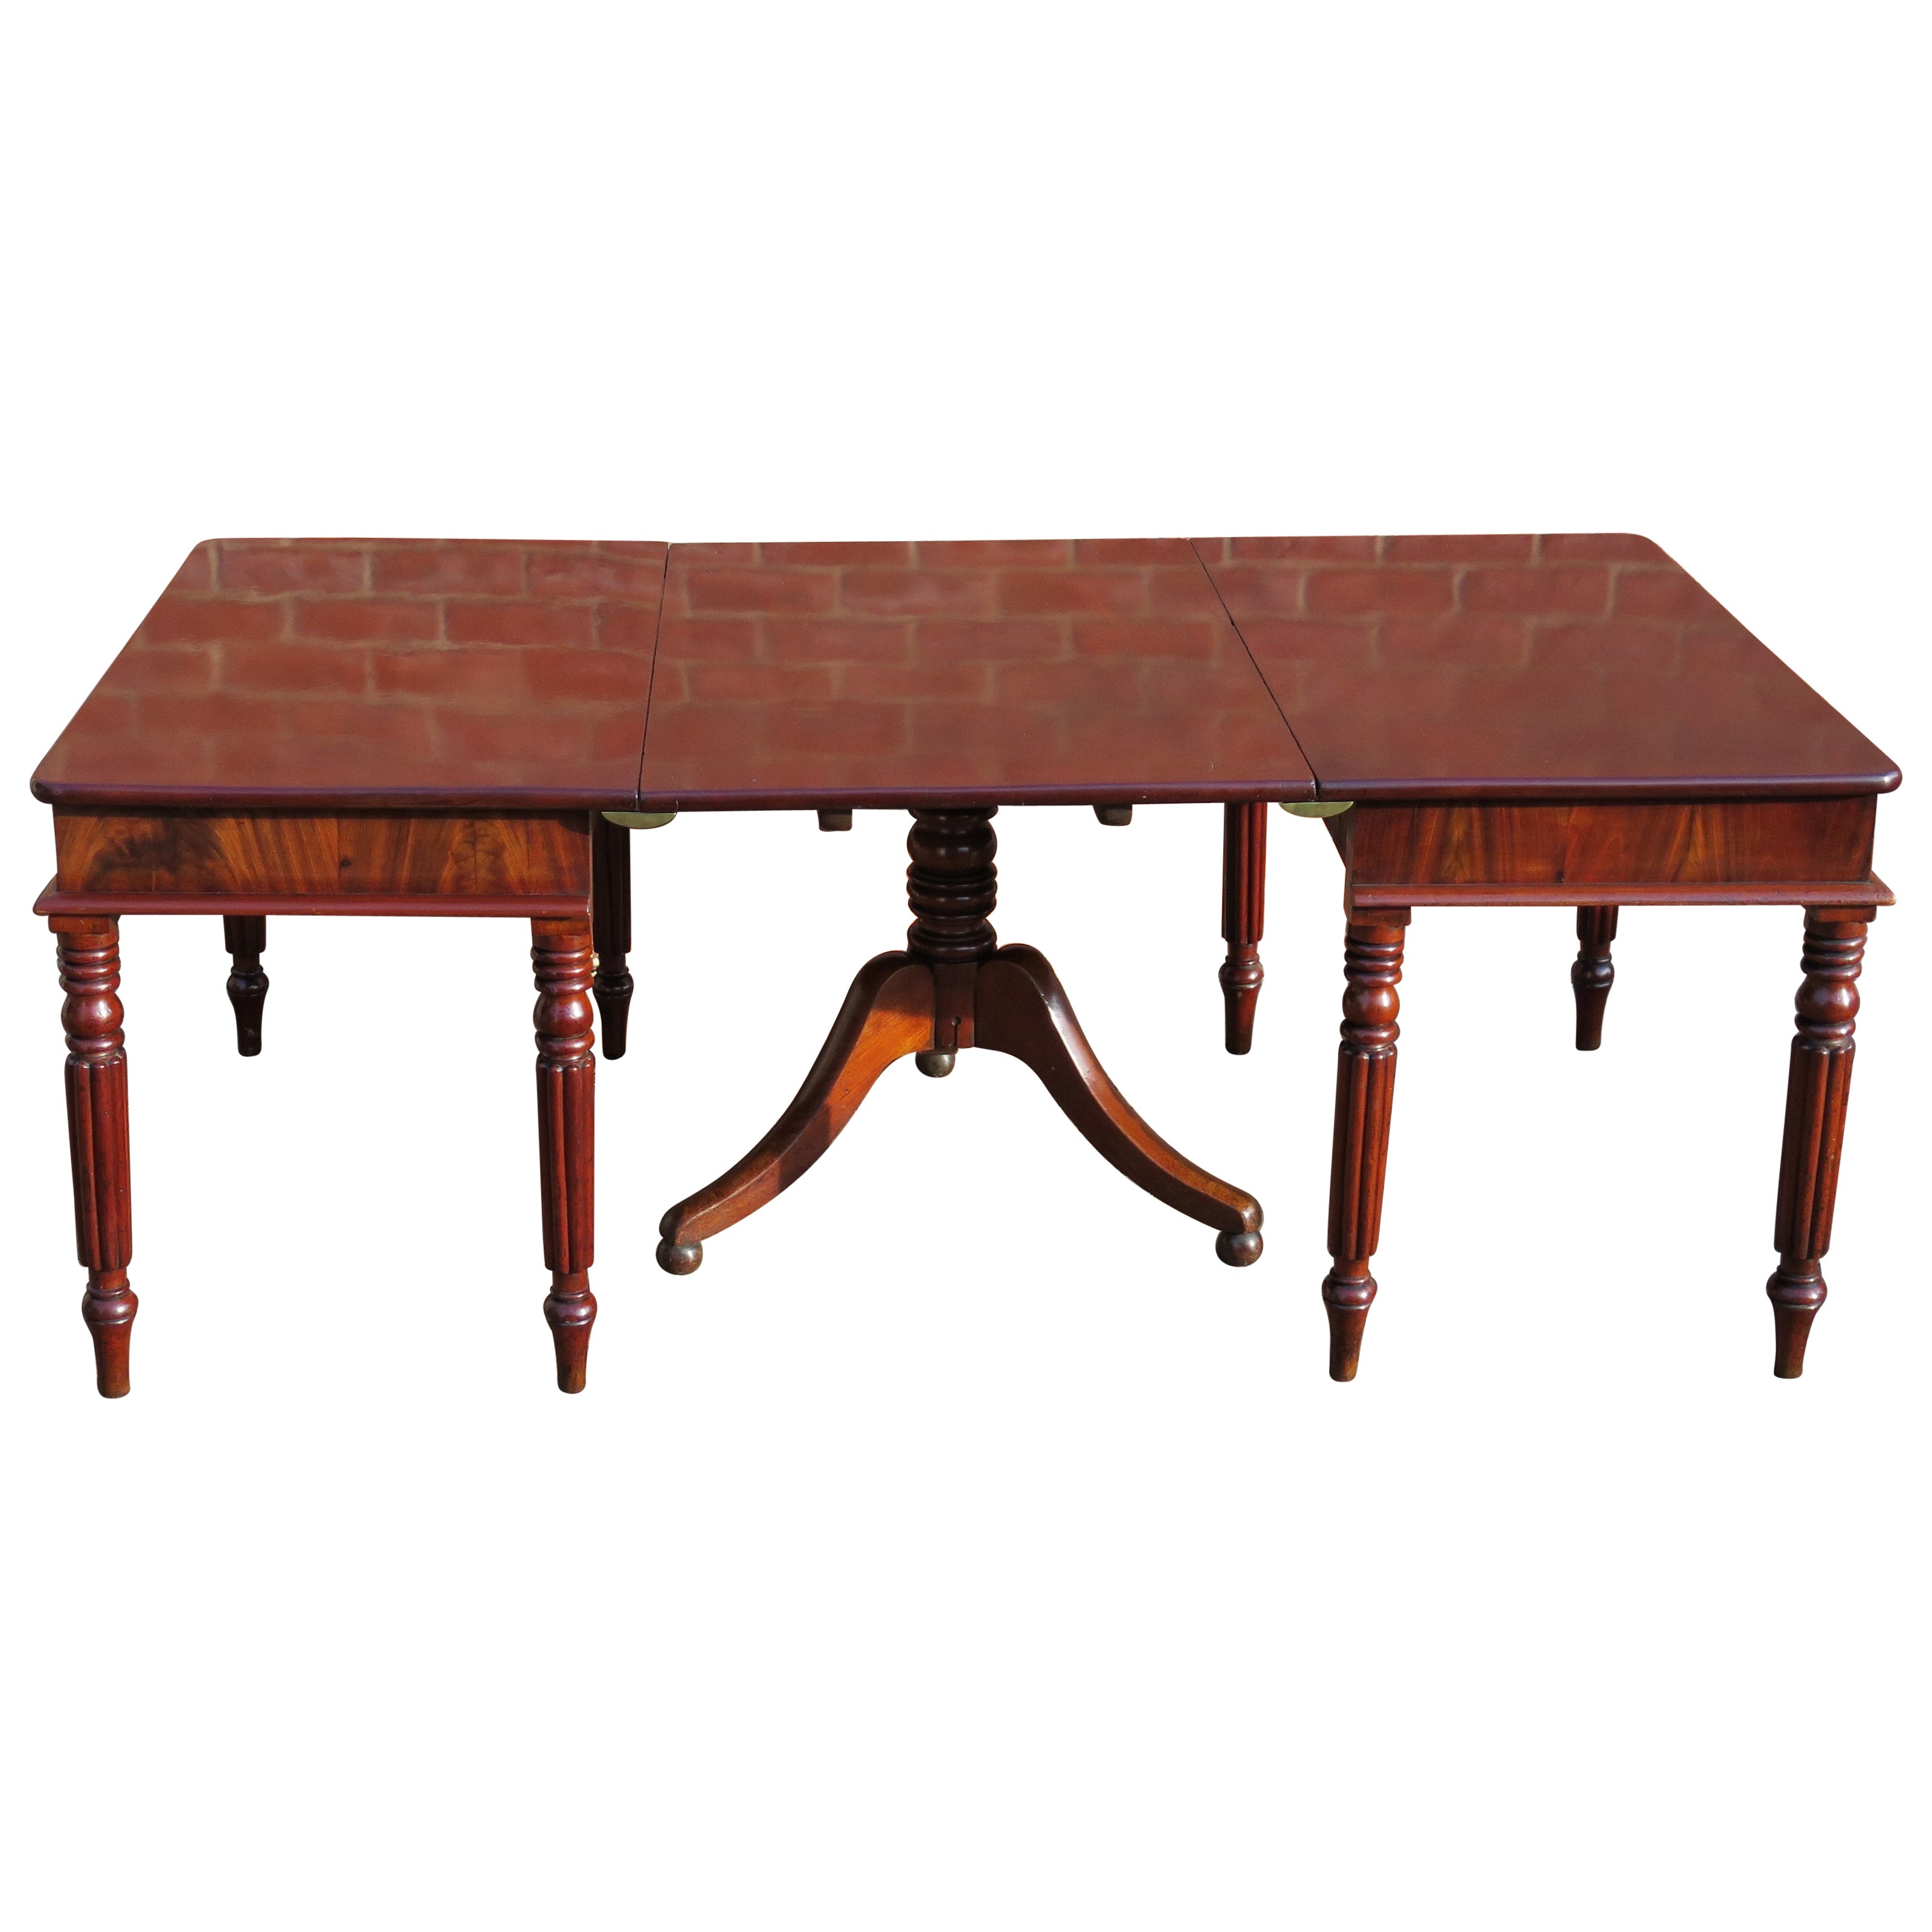 English Regency Period Extending Dining Table with centre pedestal,  Circa 1810 For Sale